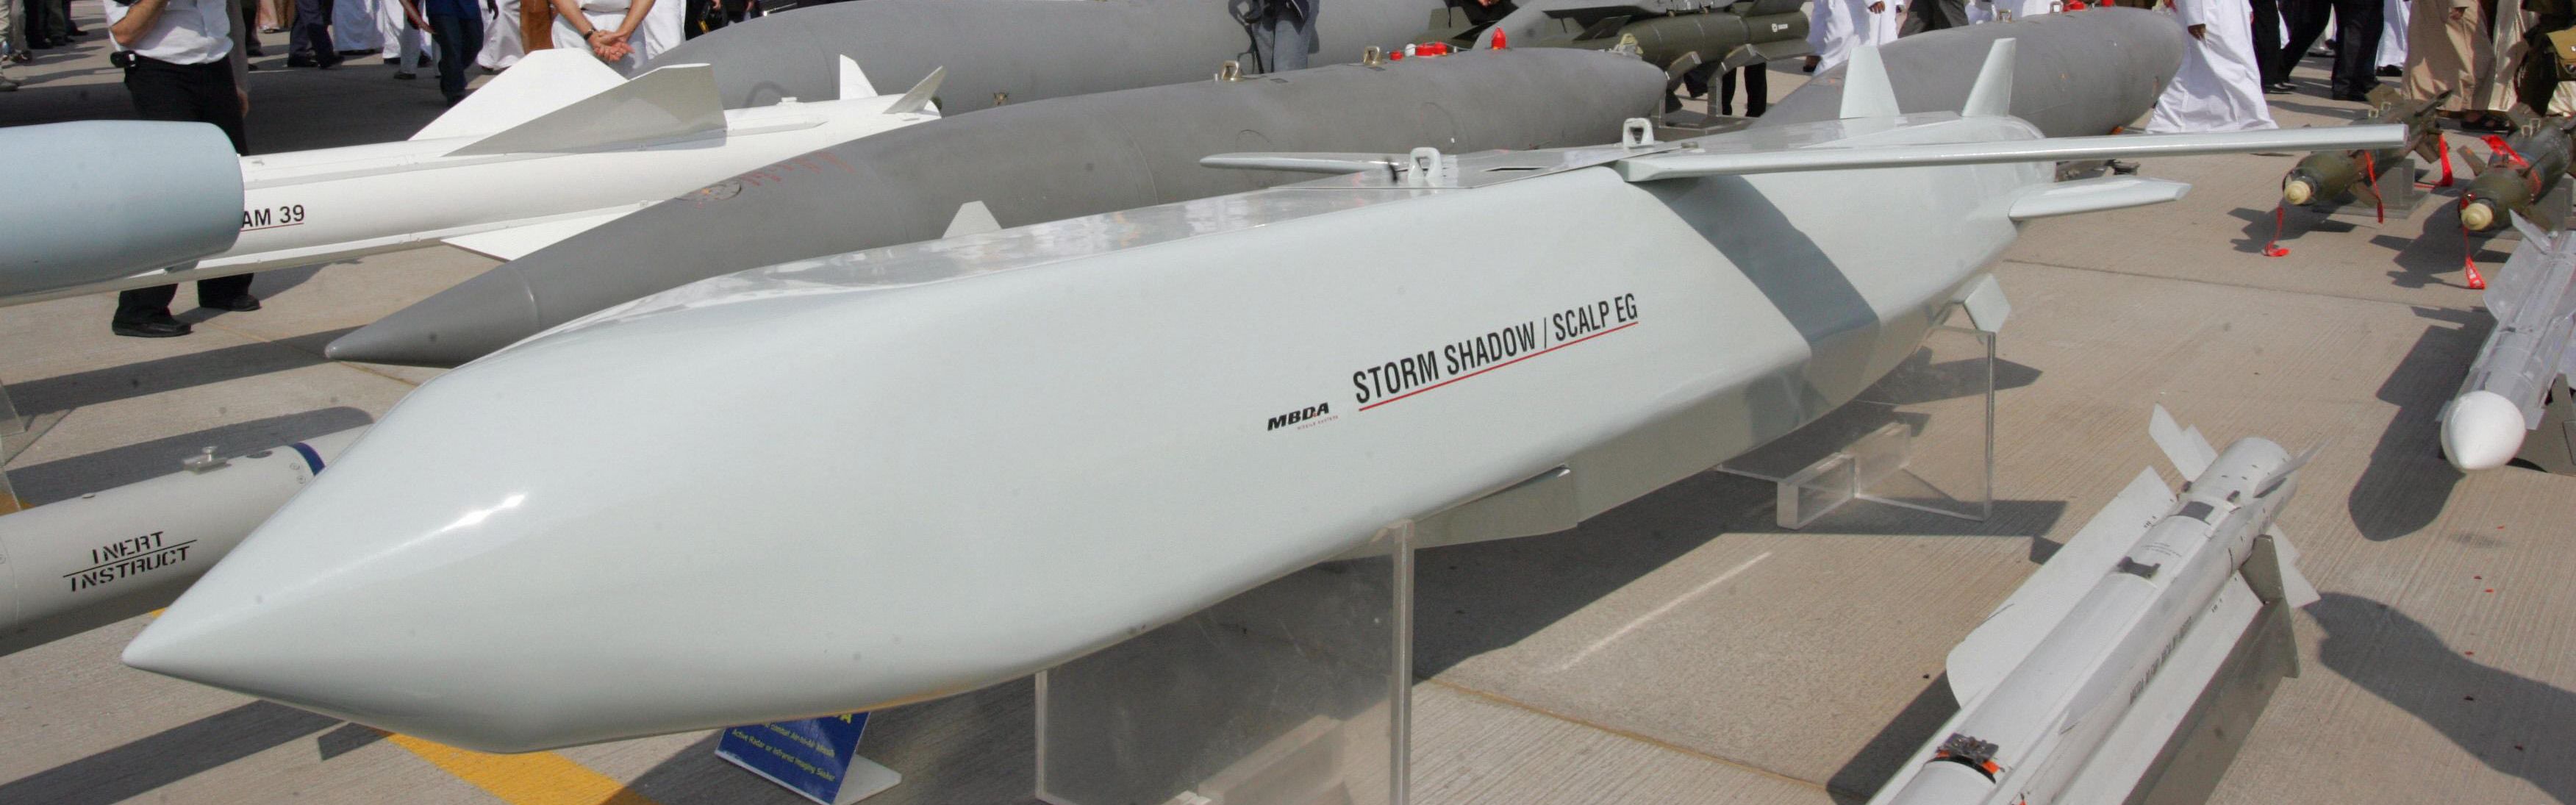 230228181659-storm-shadow-cruise-missile-022823